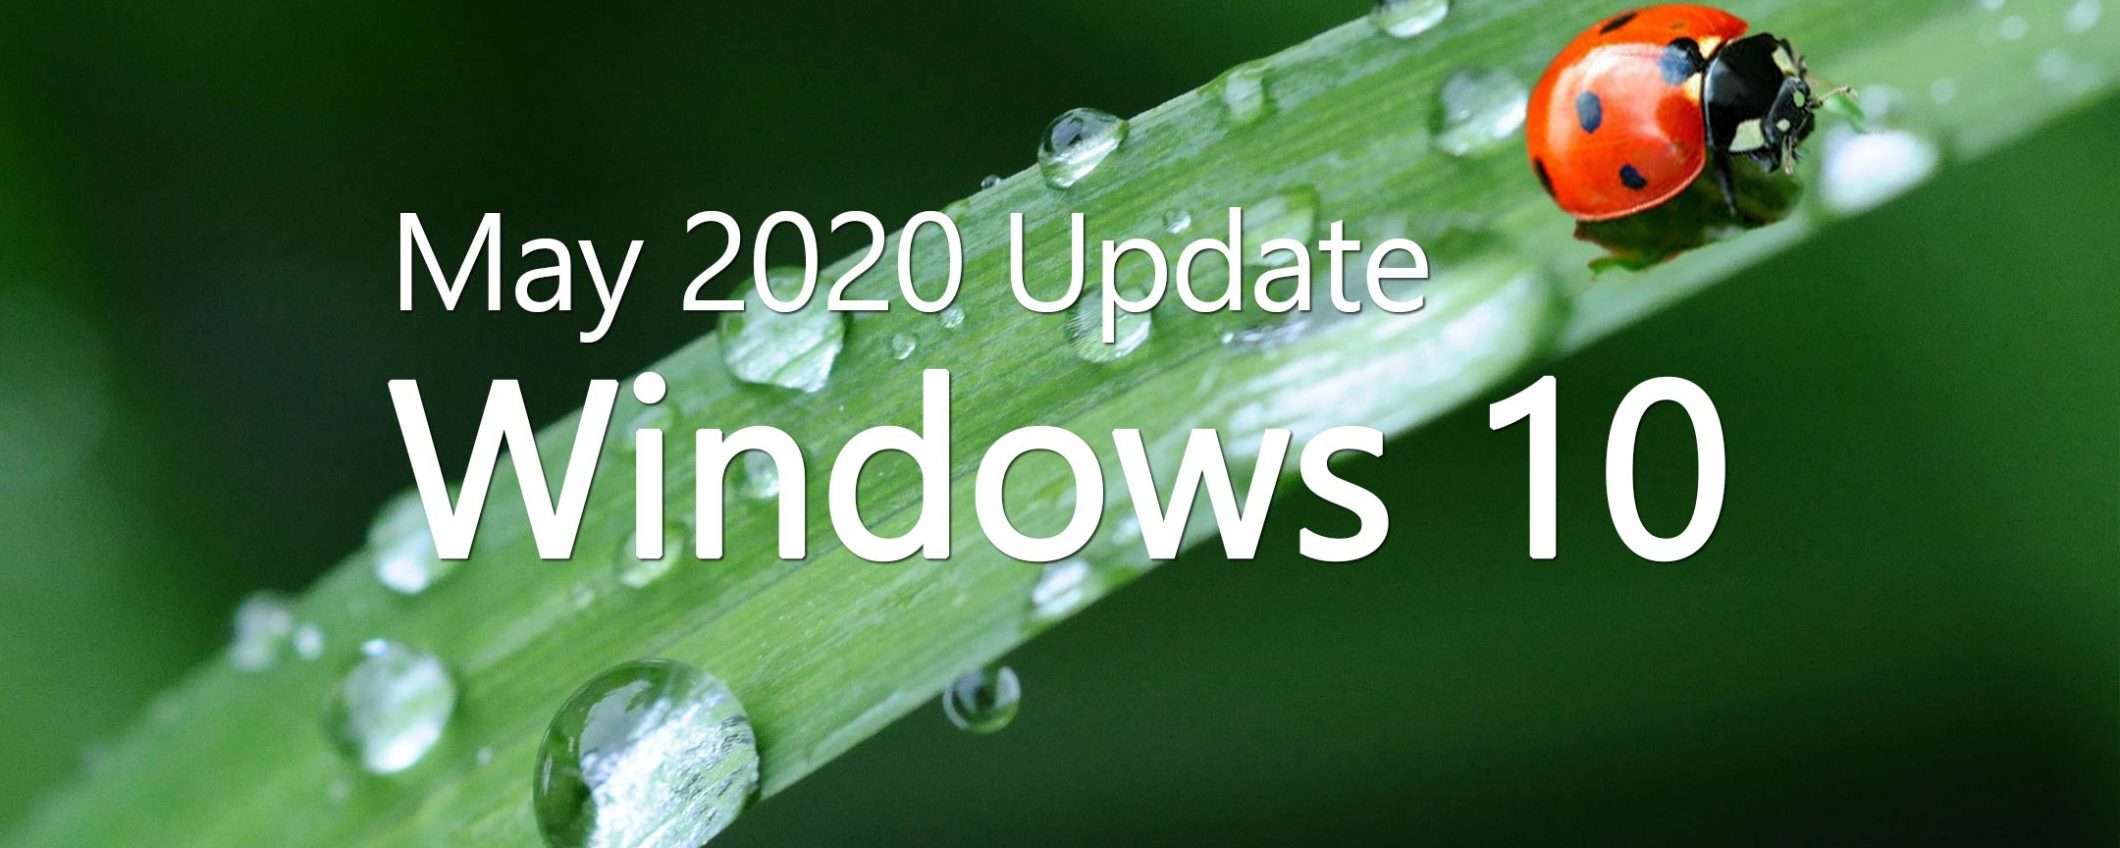 Windows 10 May 2020 Update, prosegue il rollout